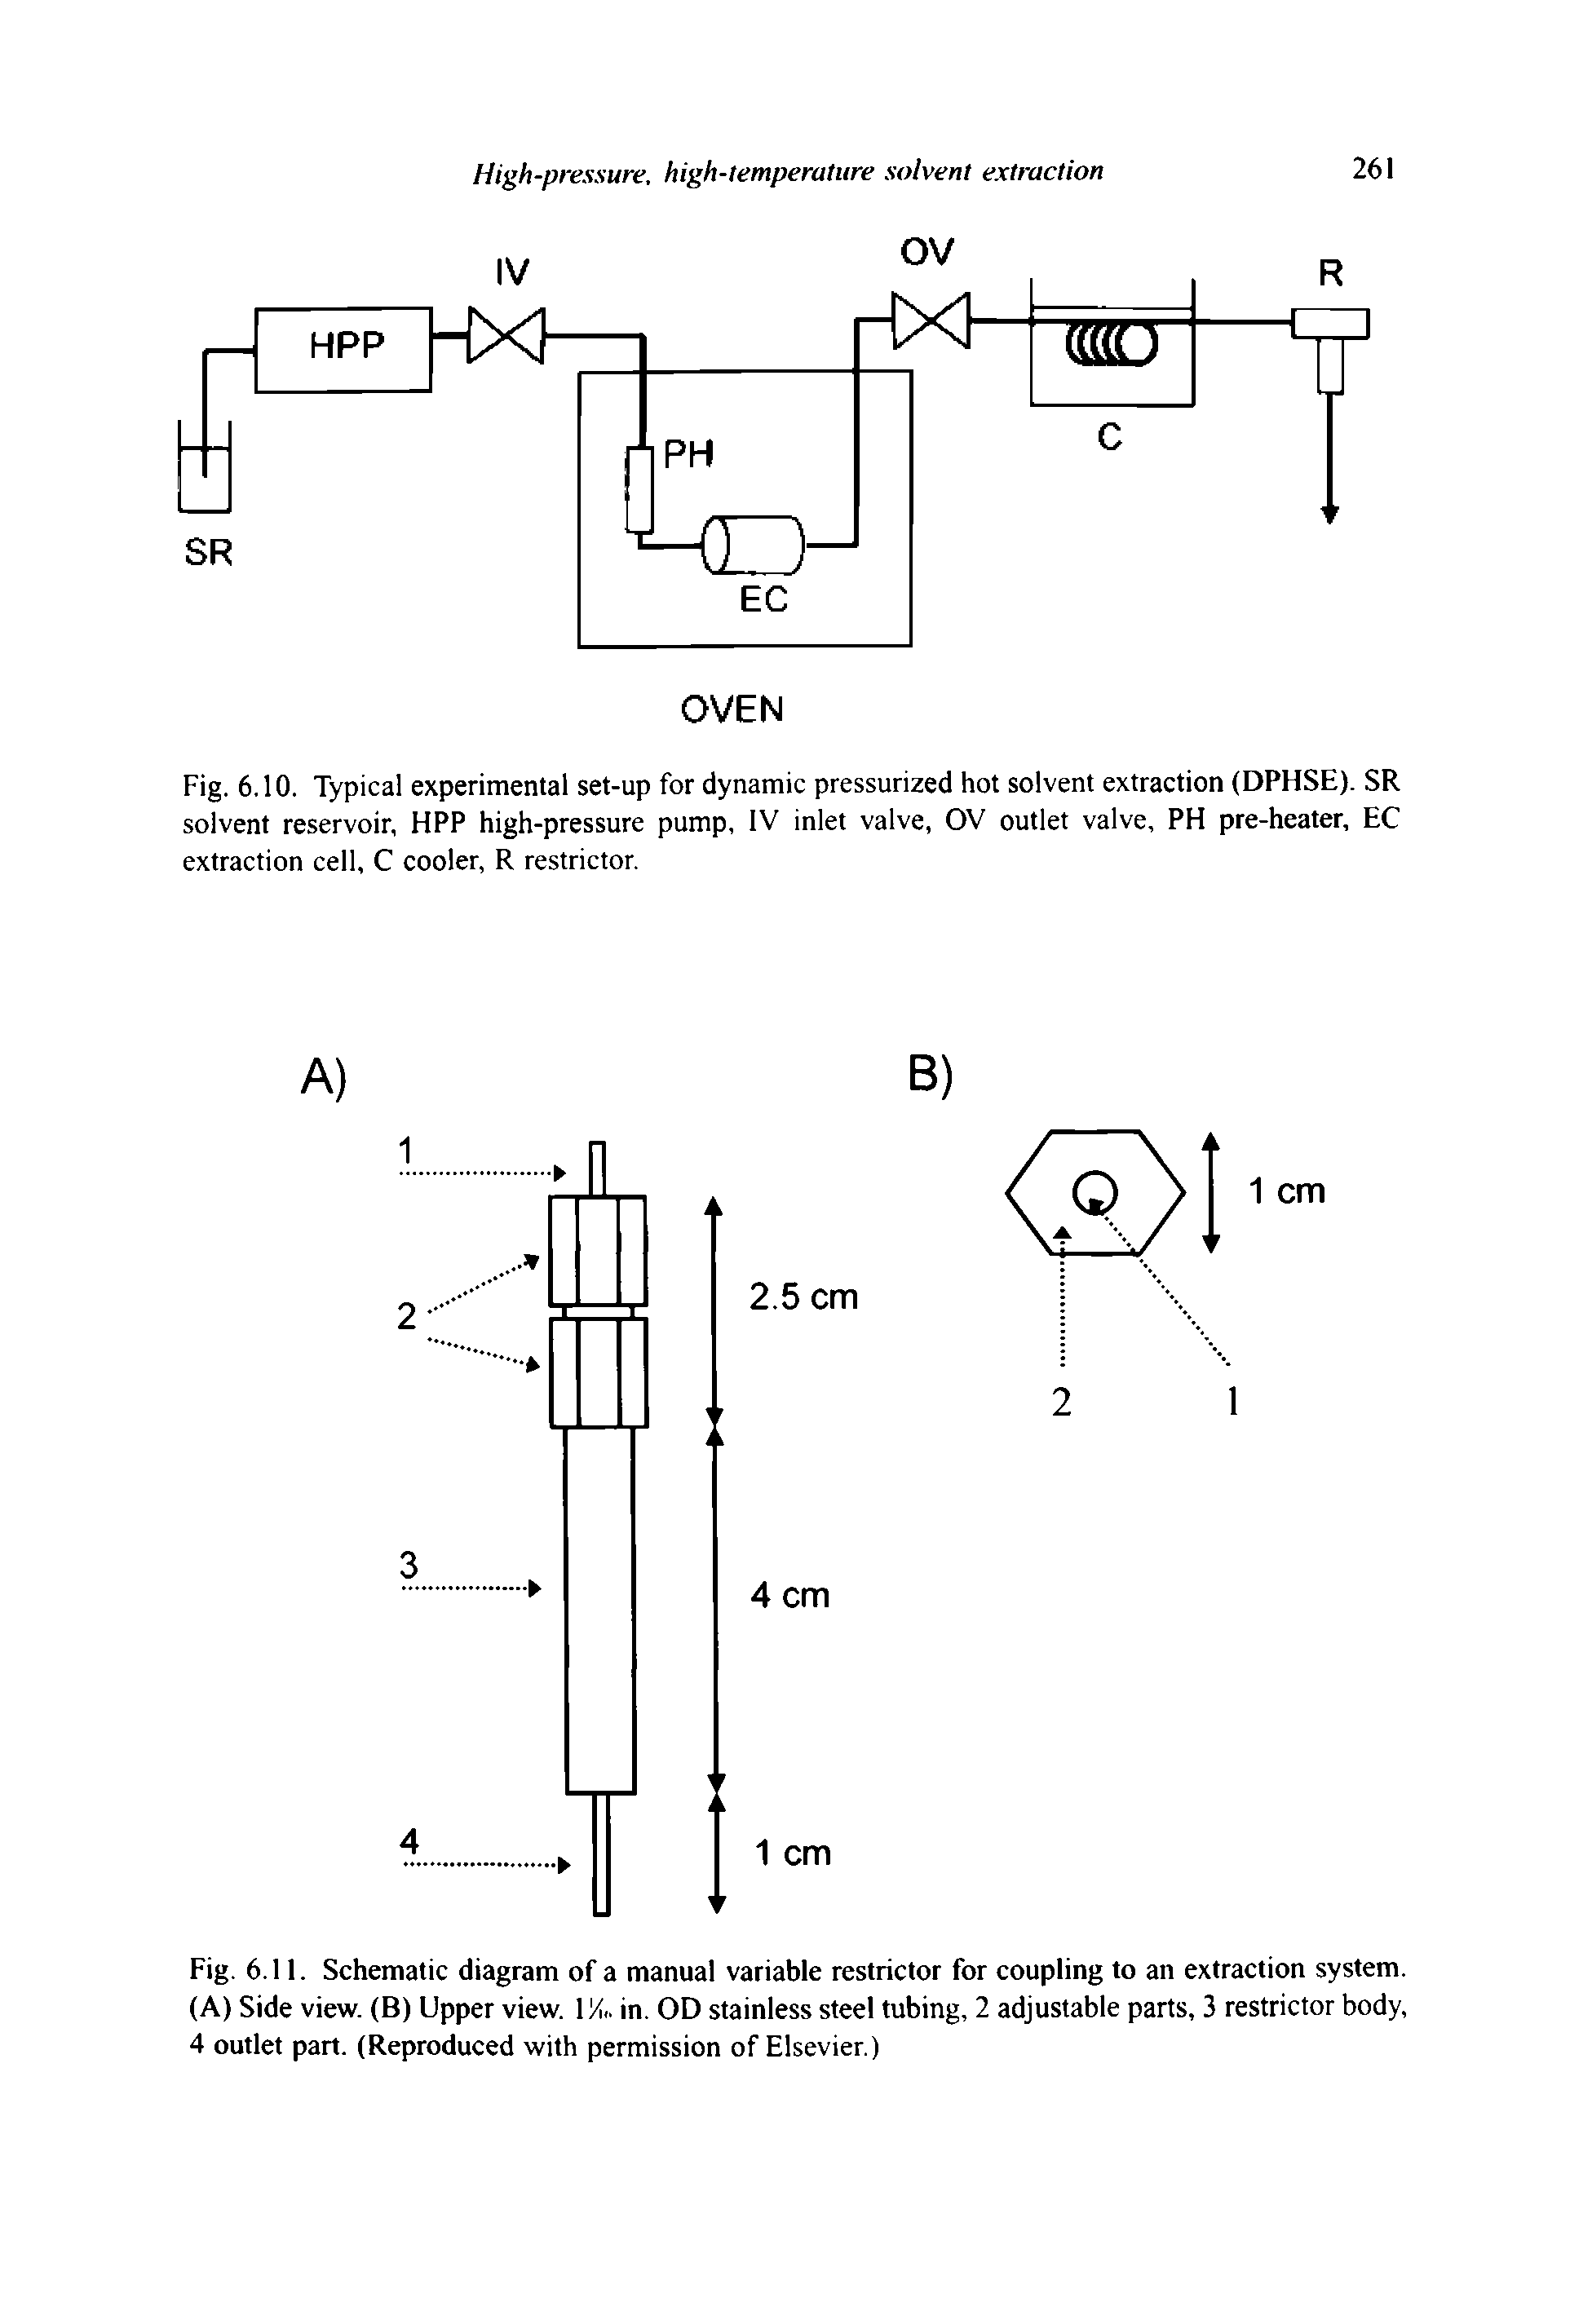 Fig. 6.11. Schematic diagram of a manual variable restrictor for coupling to an extraction system. (A) Side view. (B) Upper view. IX. in. OD stainless steel tubing, 2 adjustable parts, 3 restrictor body, 4 outlet part. (Reproduced with permission of Elsevier.)...